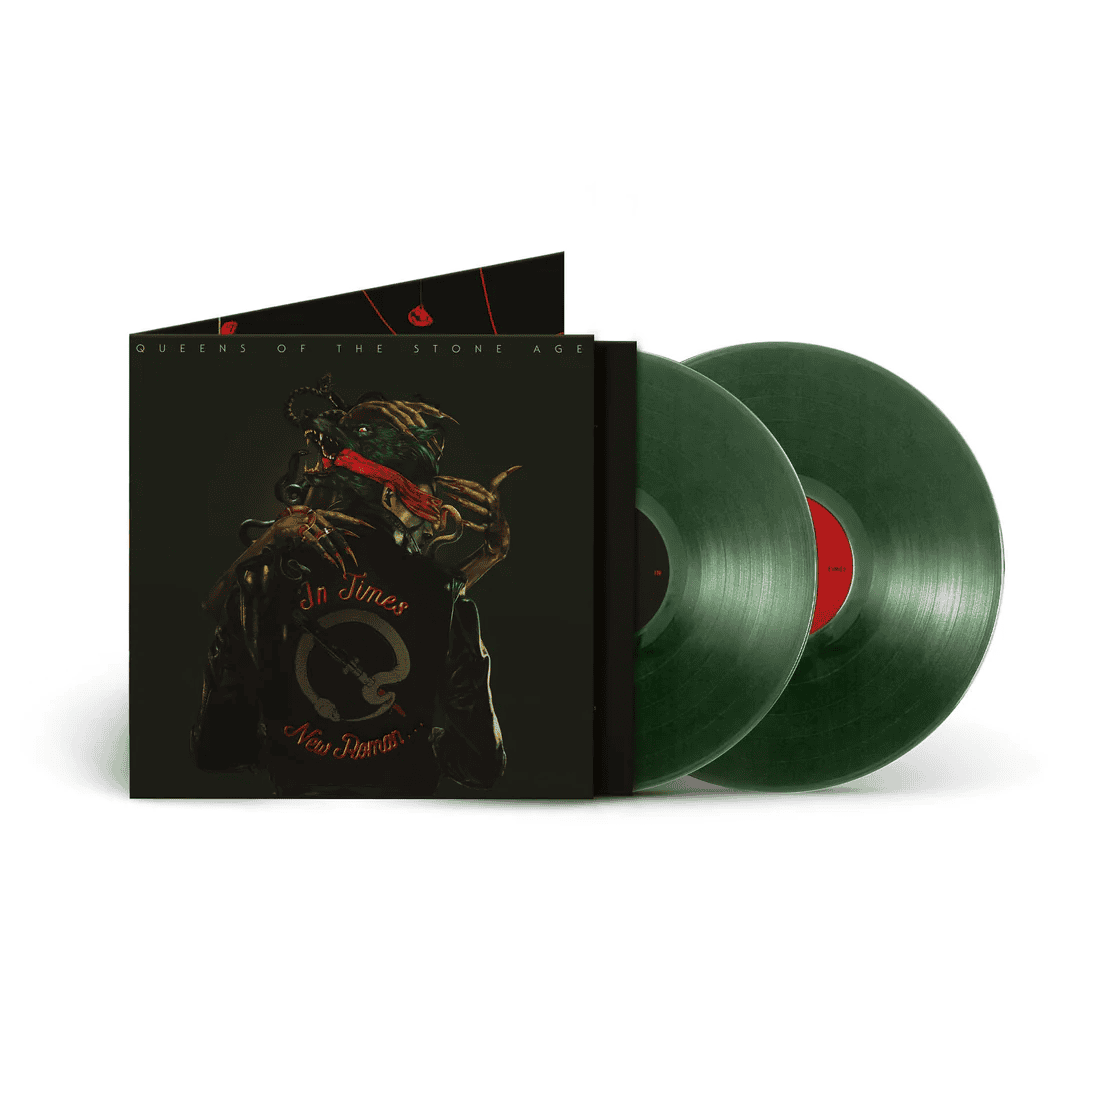 QUEENS OF THE STONE AGE - In Times New Roman Vinyl - JWrayRecords